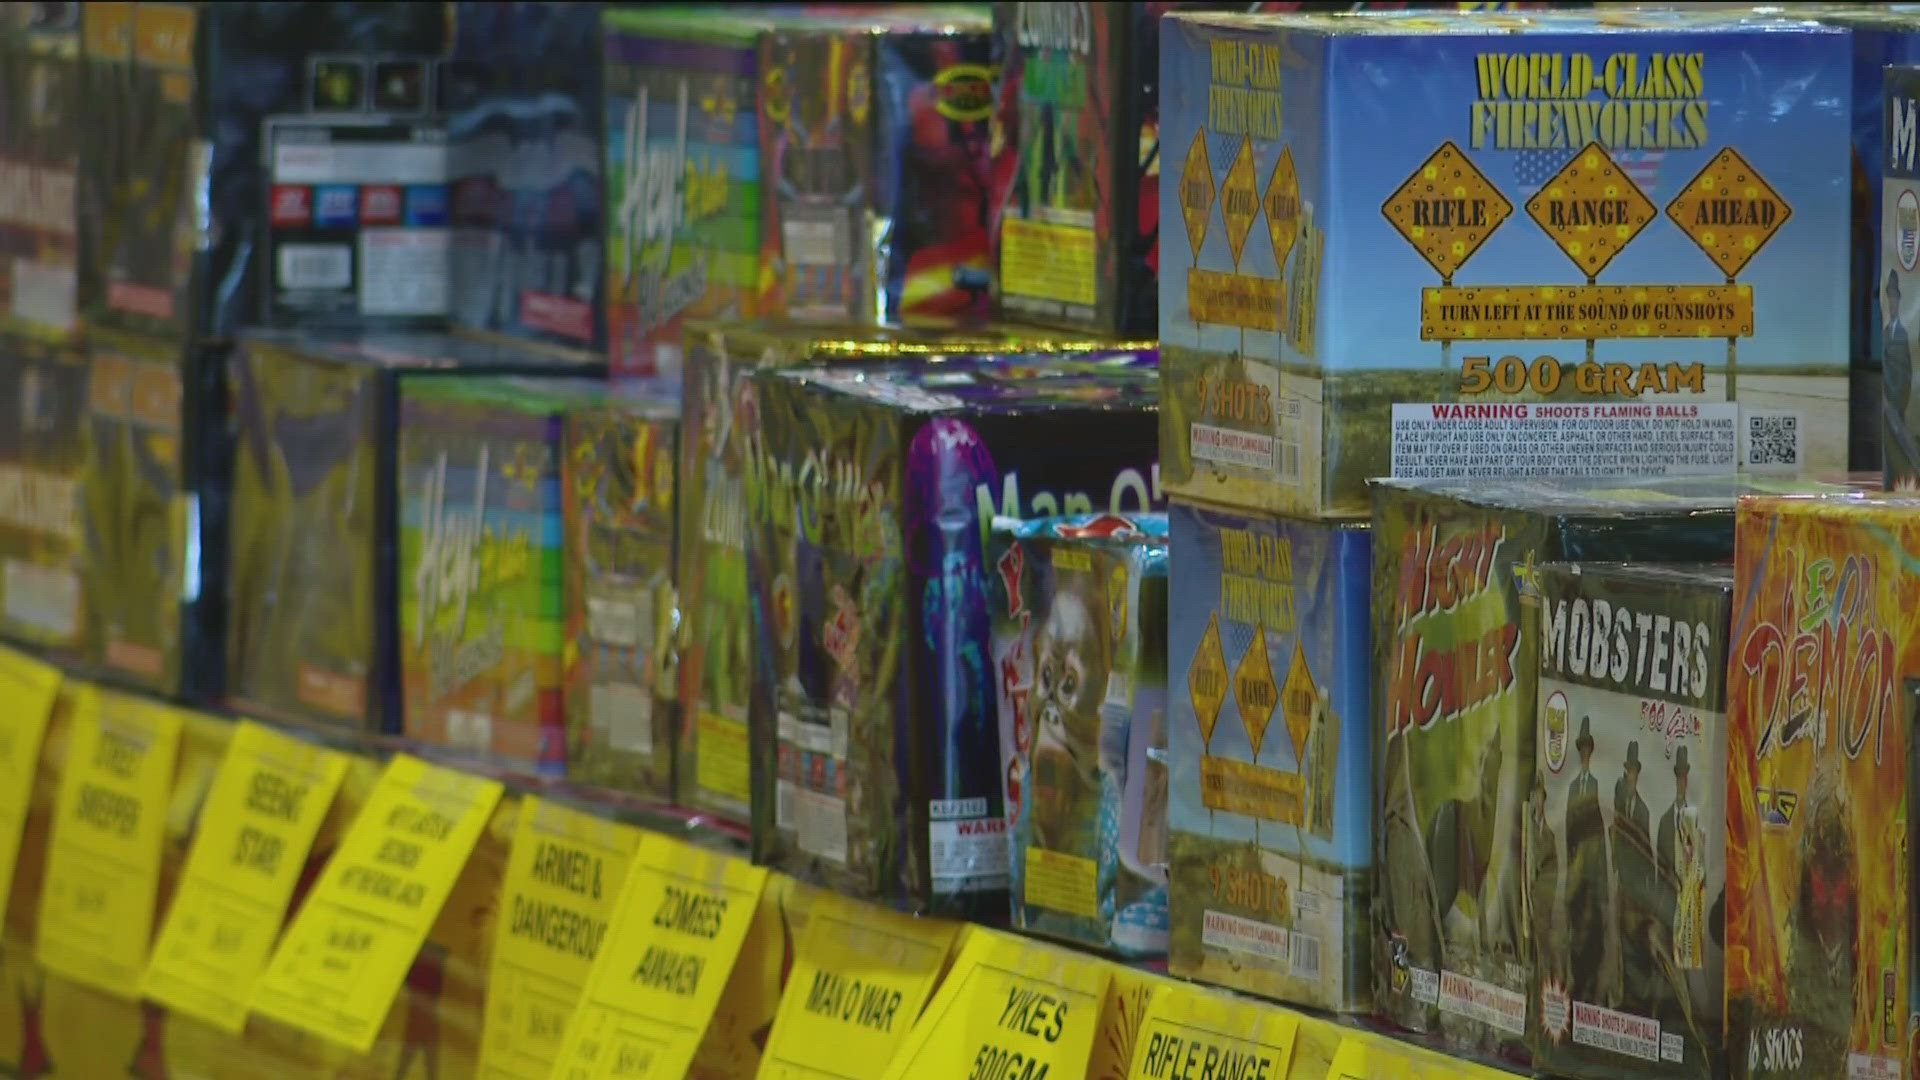 While fireworks are legal in Ohio, some municipalities - Toledo included - has laws against setting them off.